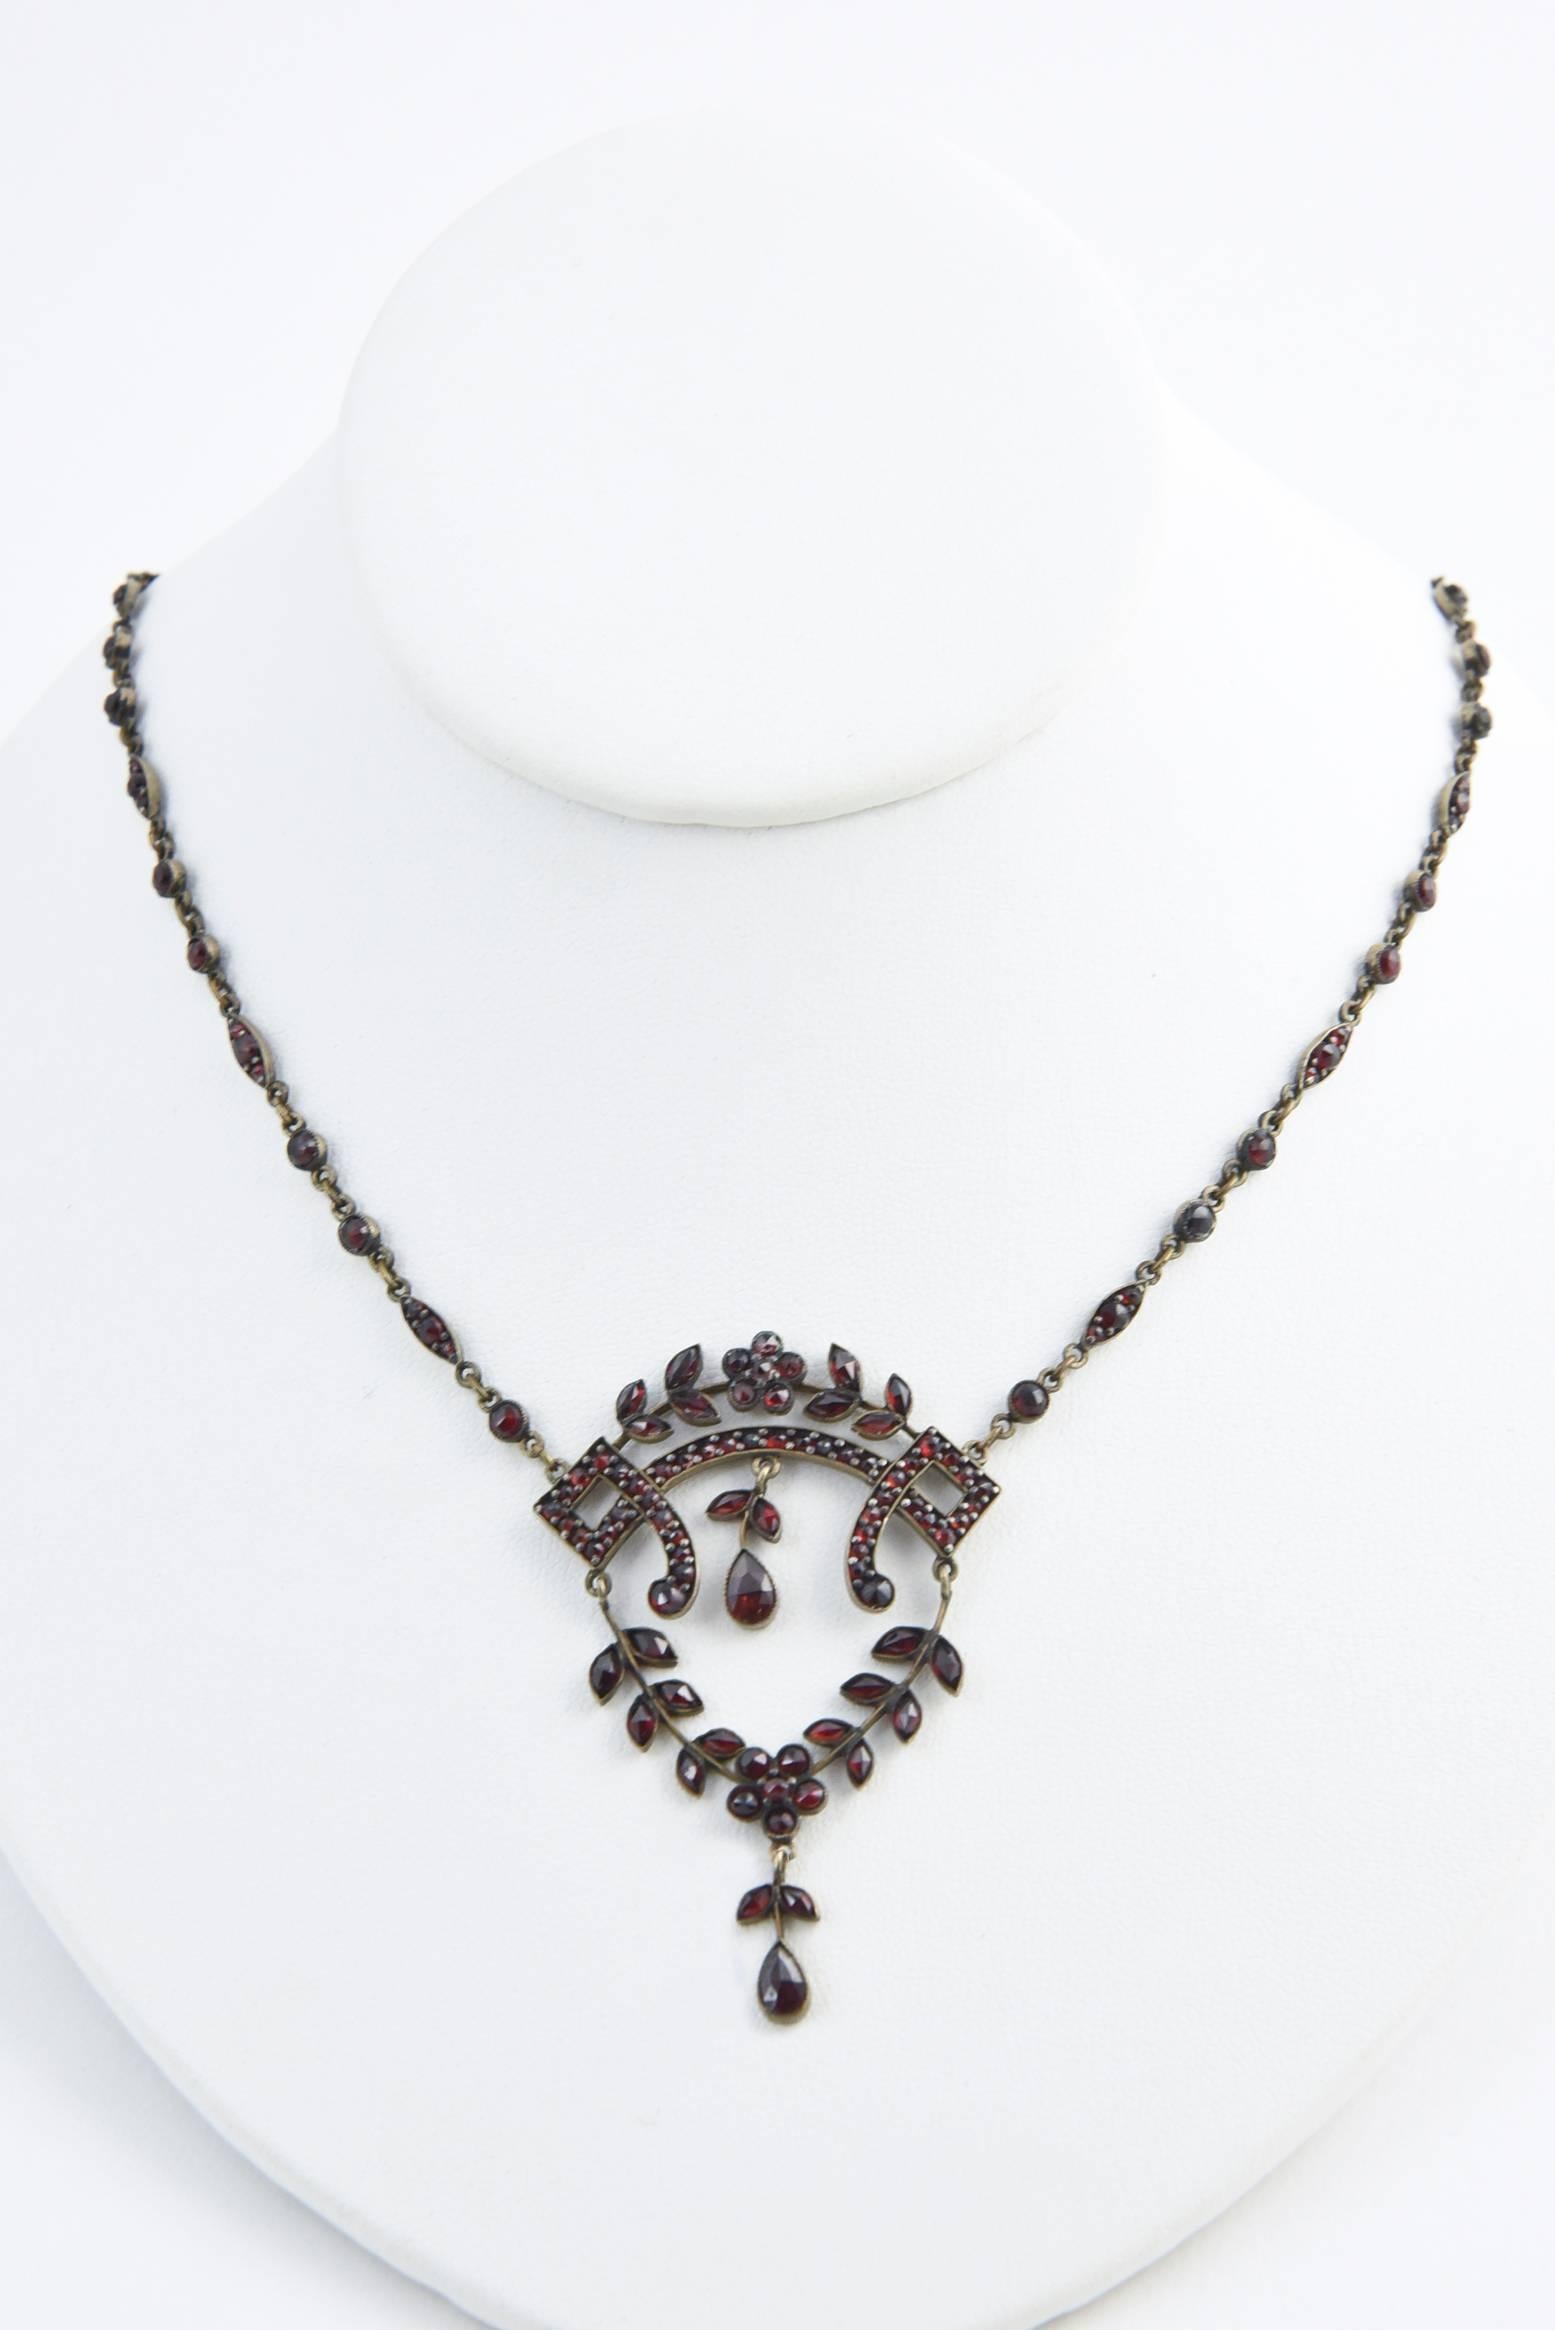 Victorian Bohemian garnet necklace centrally set with an open-frame pendant decorated in garland motifs. The pendant suspends from a sectional repeated design of links flanked with beaded spacers ending with a floral clasp